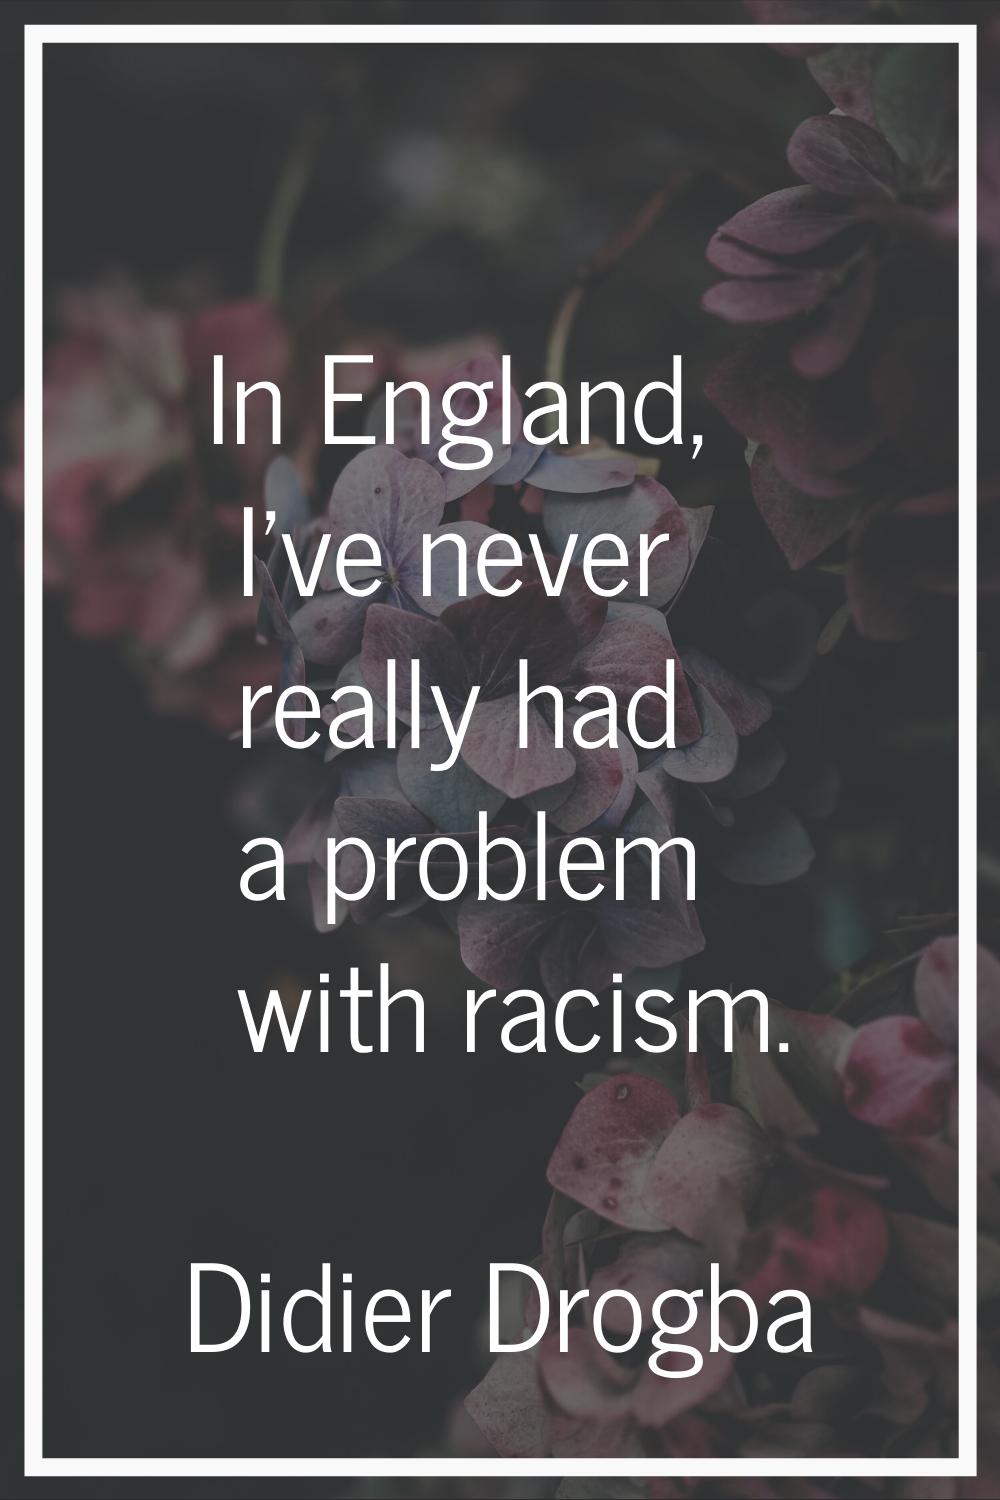 In England, I've never really had a problem with racism.